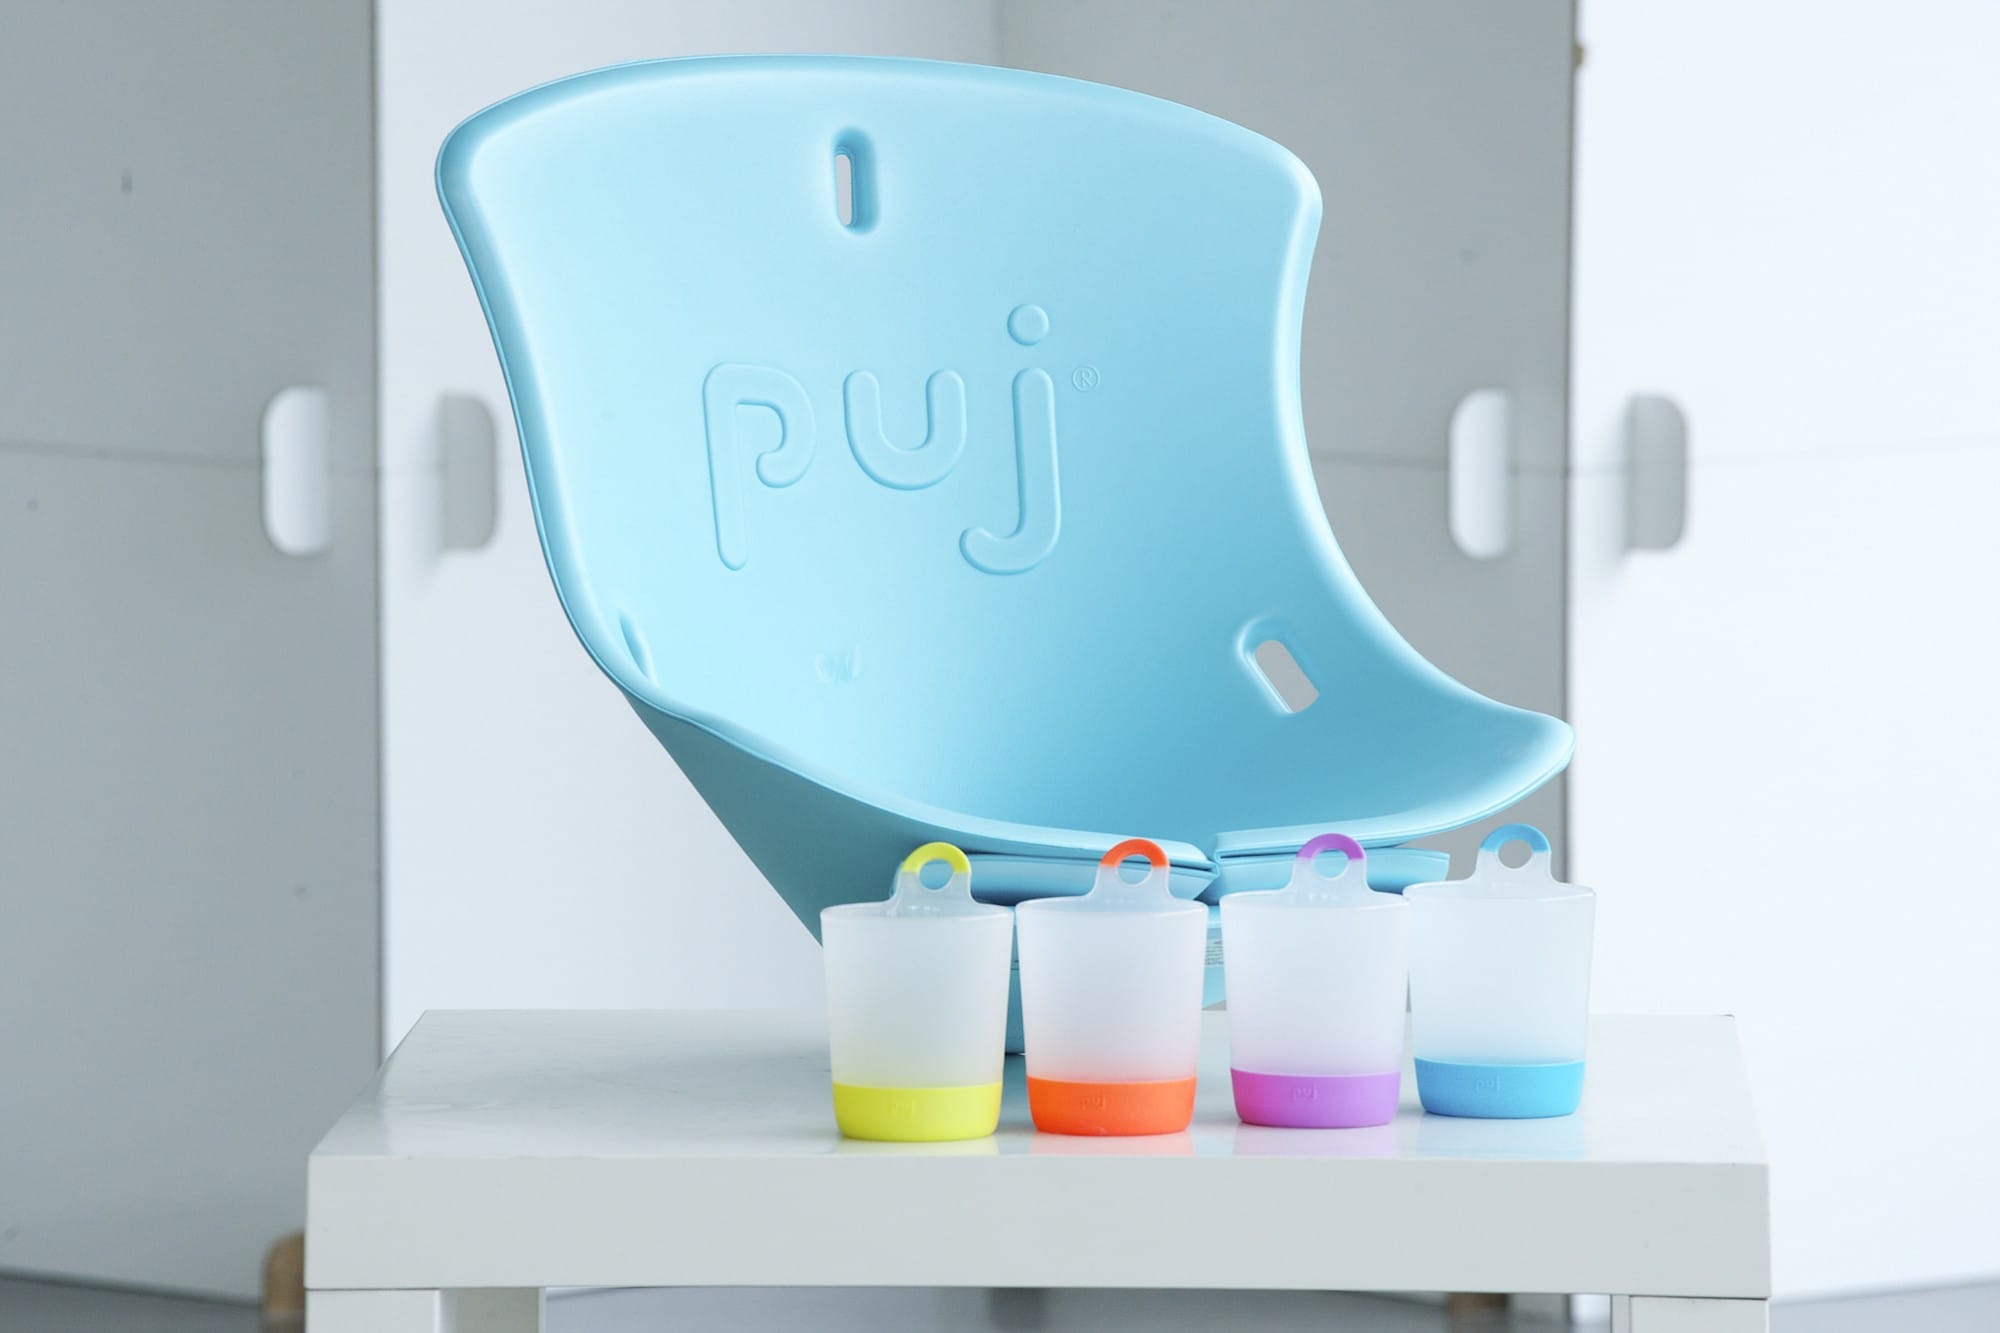 Puj got its start with the success of a stylish soft-foam infant bath called the Puj Tub.